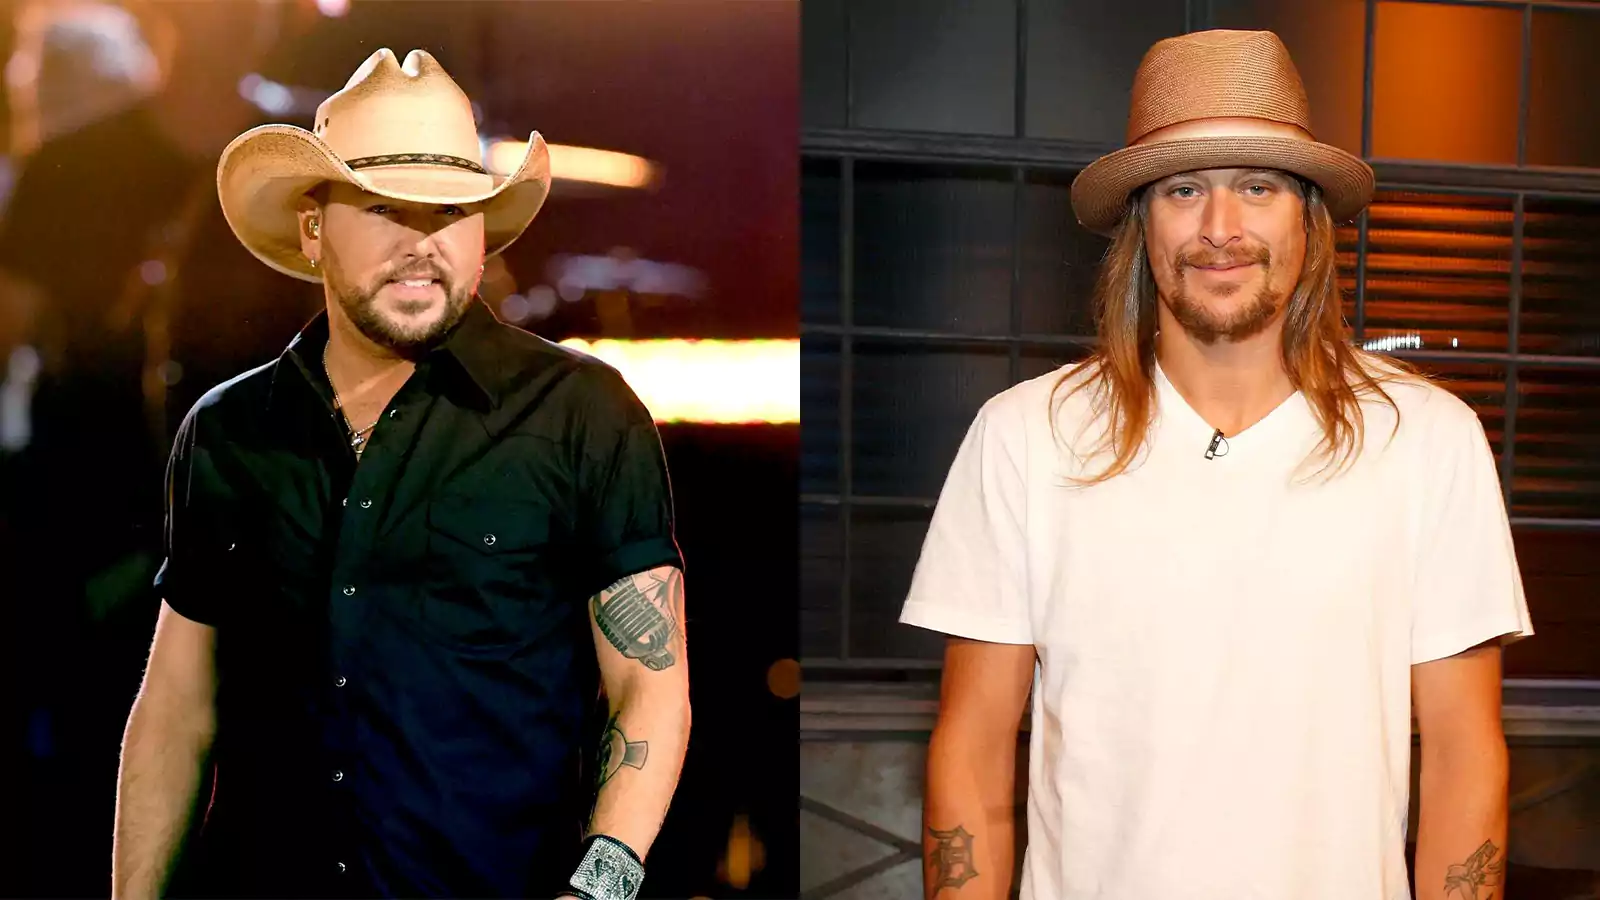 Debunked Viral Claim of Oliver Anthony Joining Kid Rock and Jason